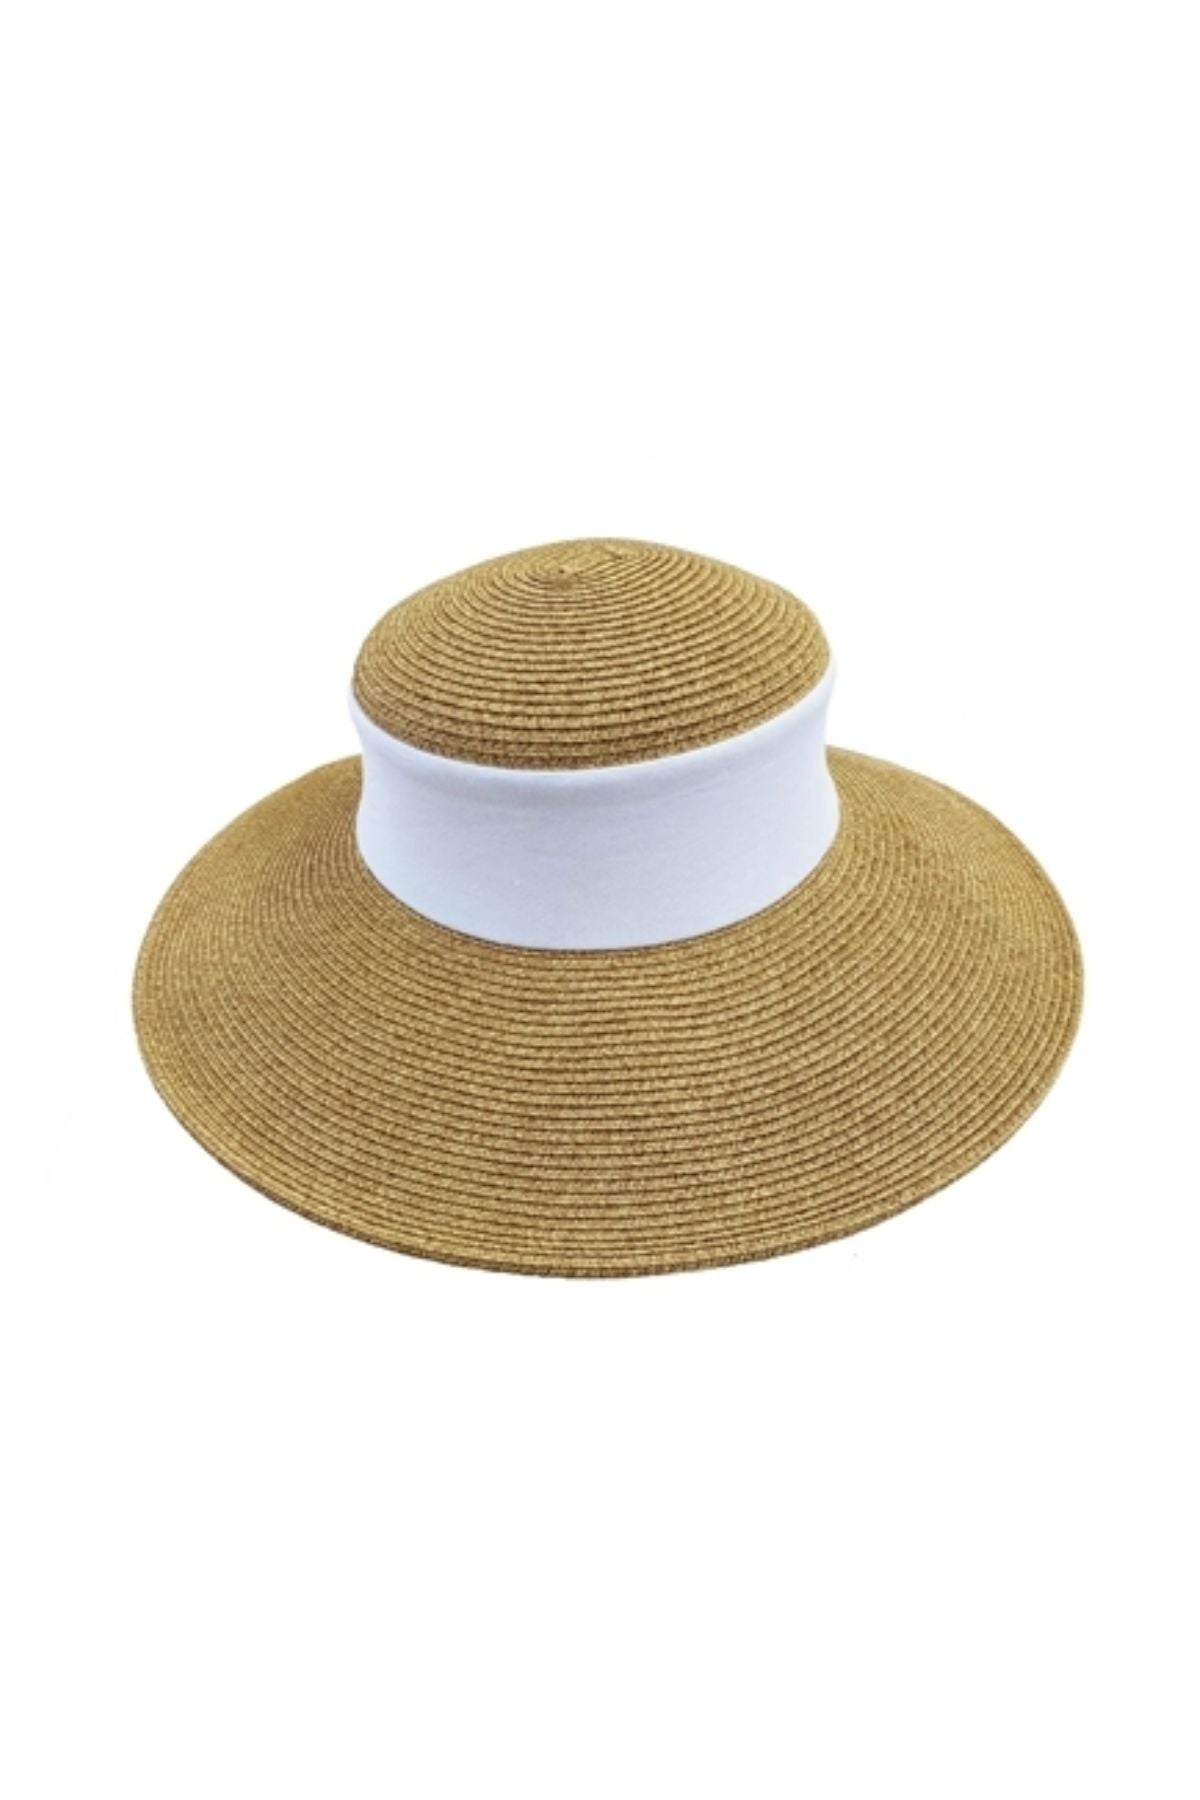 White collapsible straw sun hat